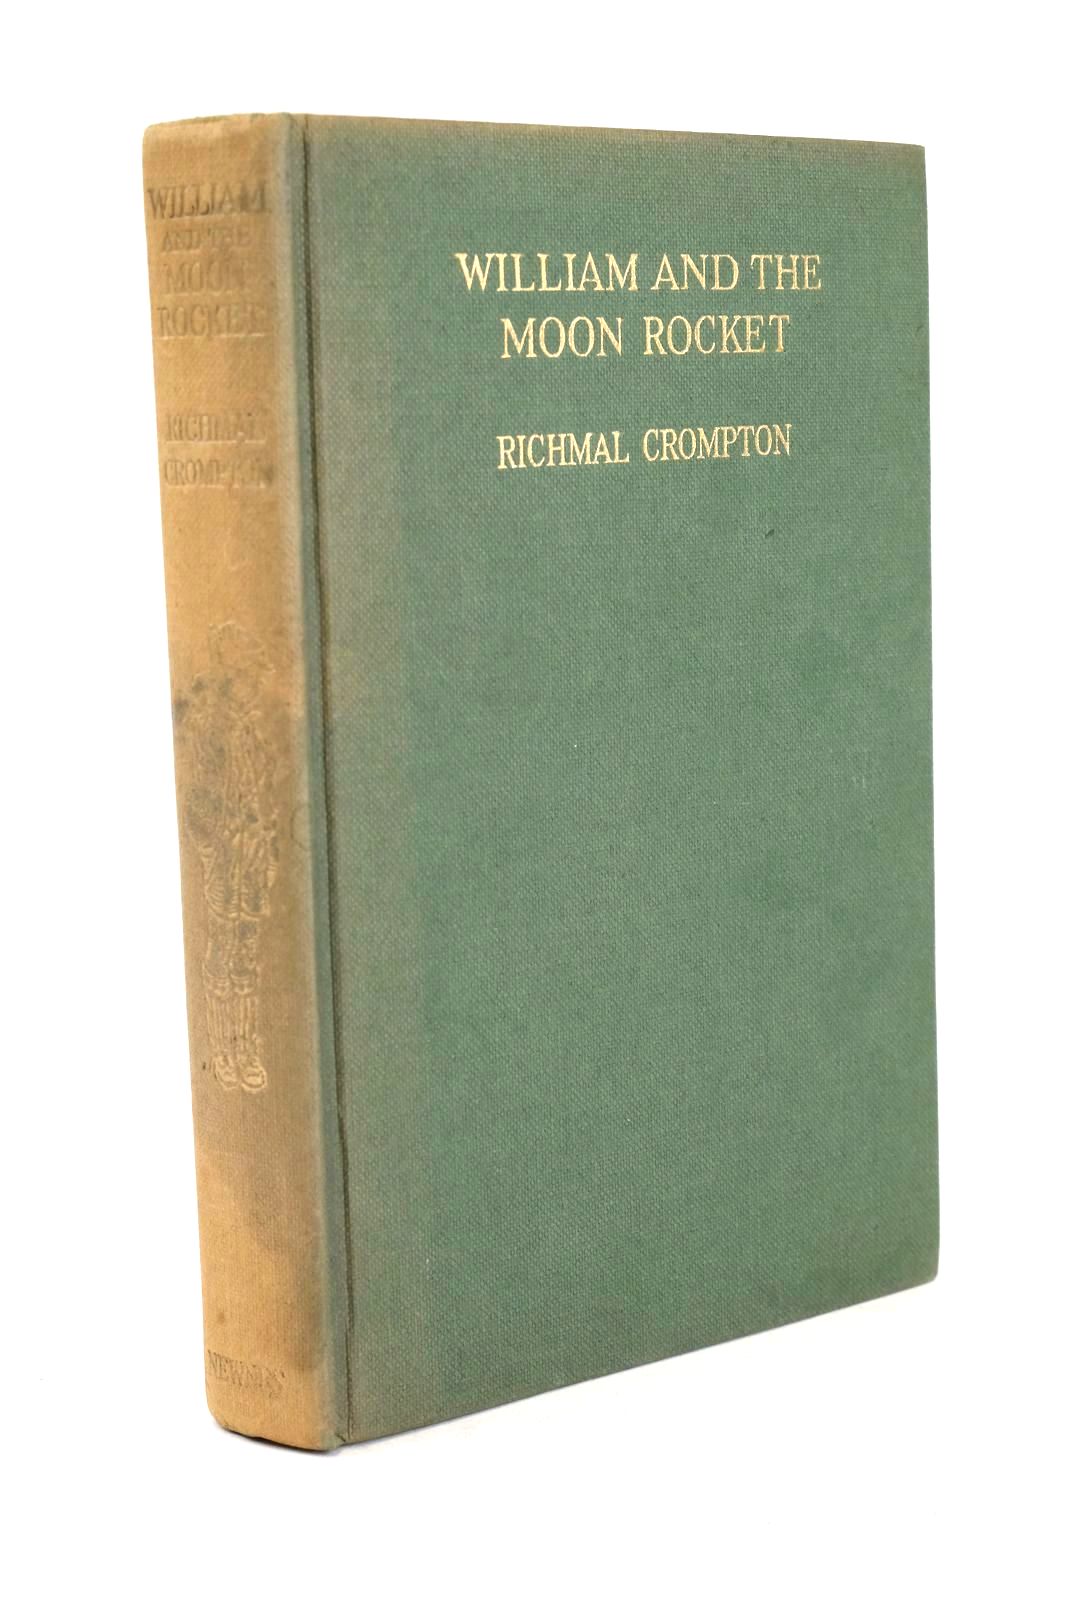 Photo of WILLIAM AND THE MOON ROCKET written by Crompton, Richmal illustrated by Henry, Thomas published by George Newnes Limited (STOCK CODE: 1326171)  for sale by Stella & Rose's Books